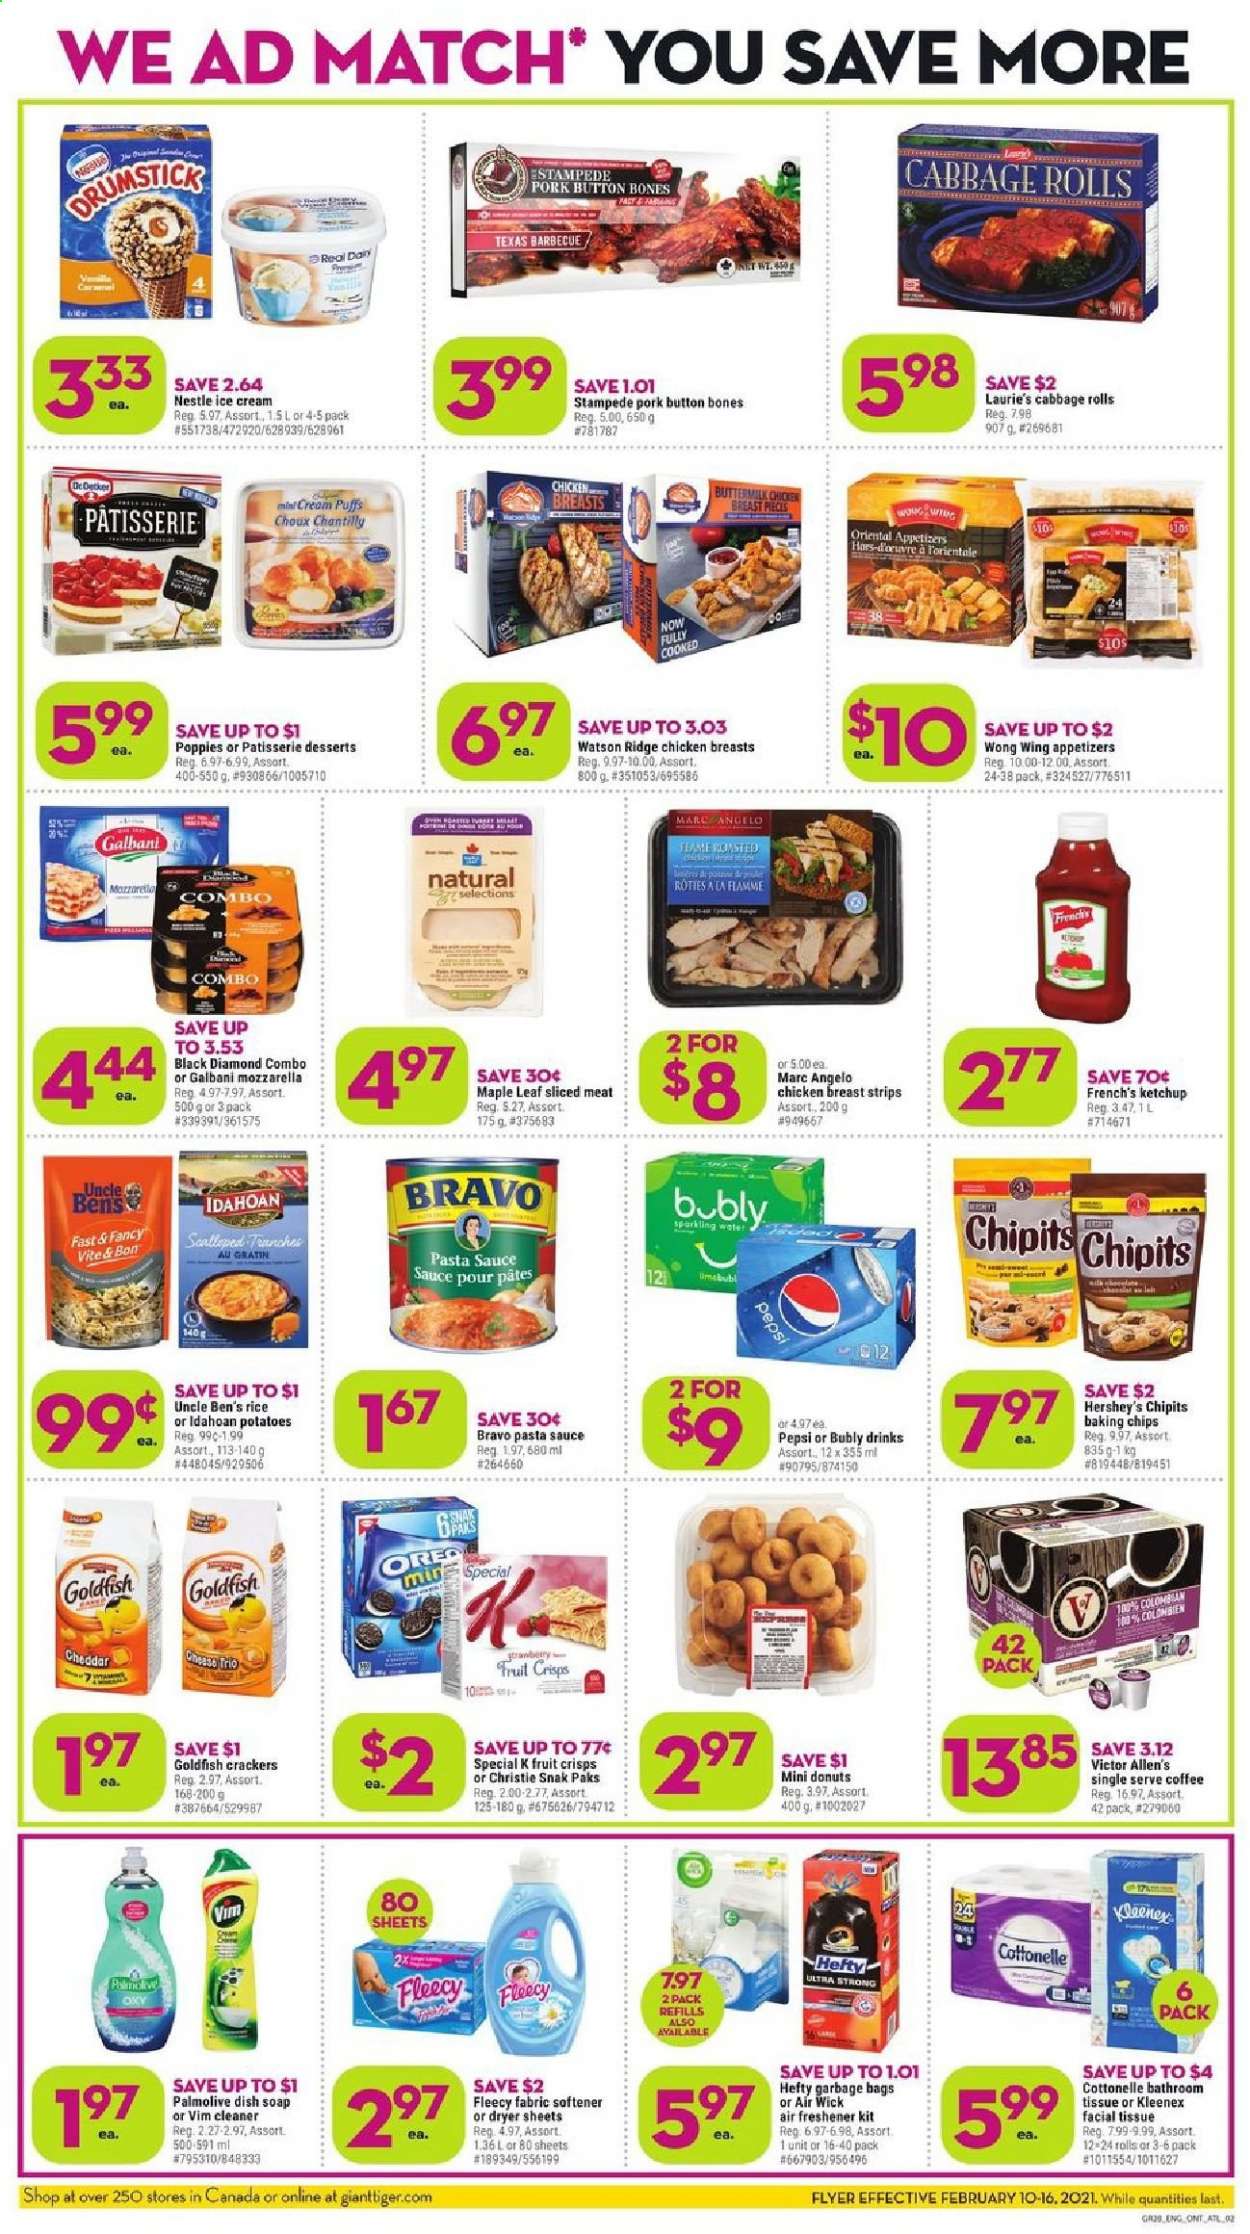 thumbnail - Giant Tiger Flyer - February 10, 2021 - February 16, 2021 - Sales products - donut, cream puffs, cabbage, pasta sauce, sauce, Galbani, Oreo, buttermilk, ice cream, Hershey's, strips, crackers, Goldfish, baking chips, Uncle Ben's, Pepsi, coffee, L'Or, chicken, bath tissue, Cottonelle, Kleenex, cleaner, fabric softener, dryer sheets, Palmolive, soap, Hefty, air freshener, Air Wick, Nestlé, mozzarella. Page 2.